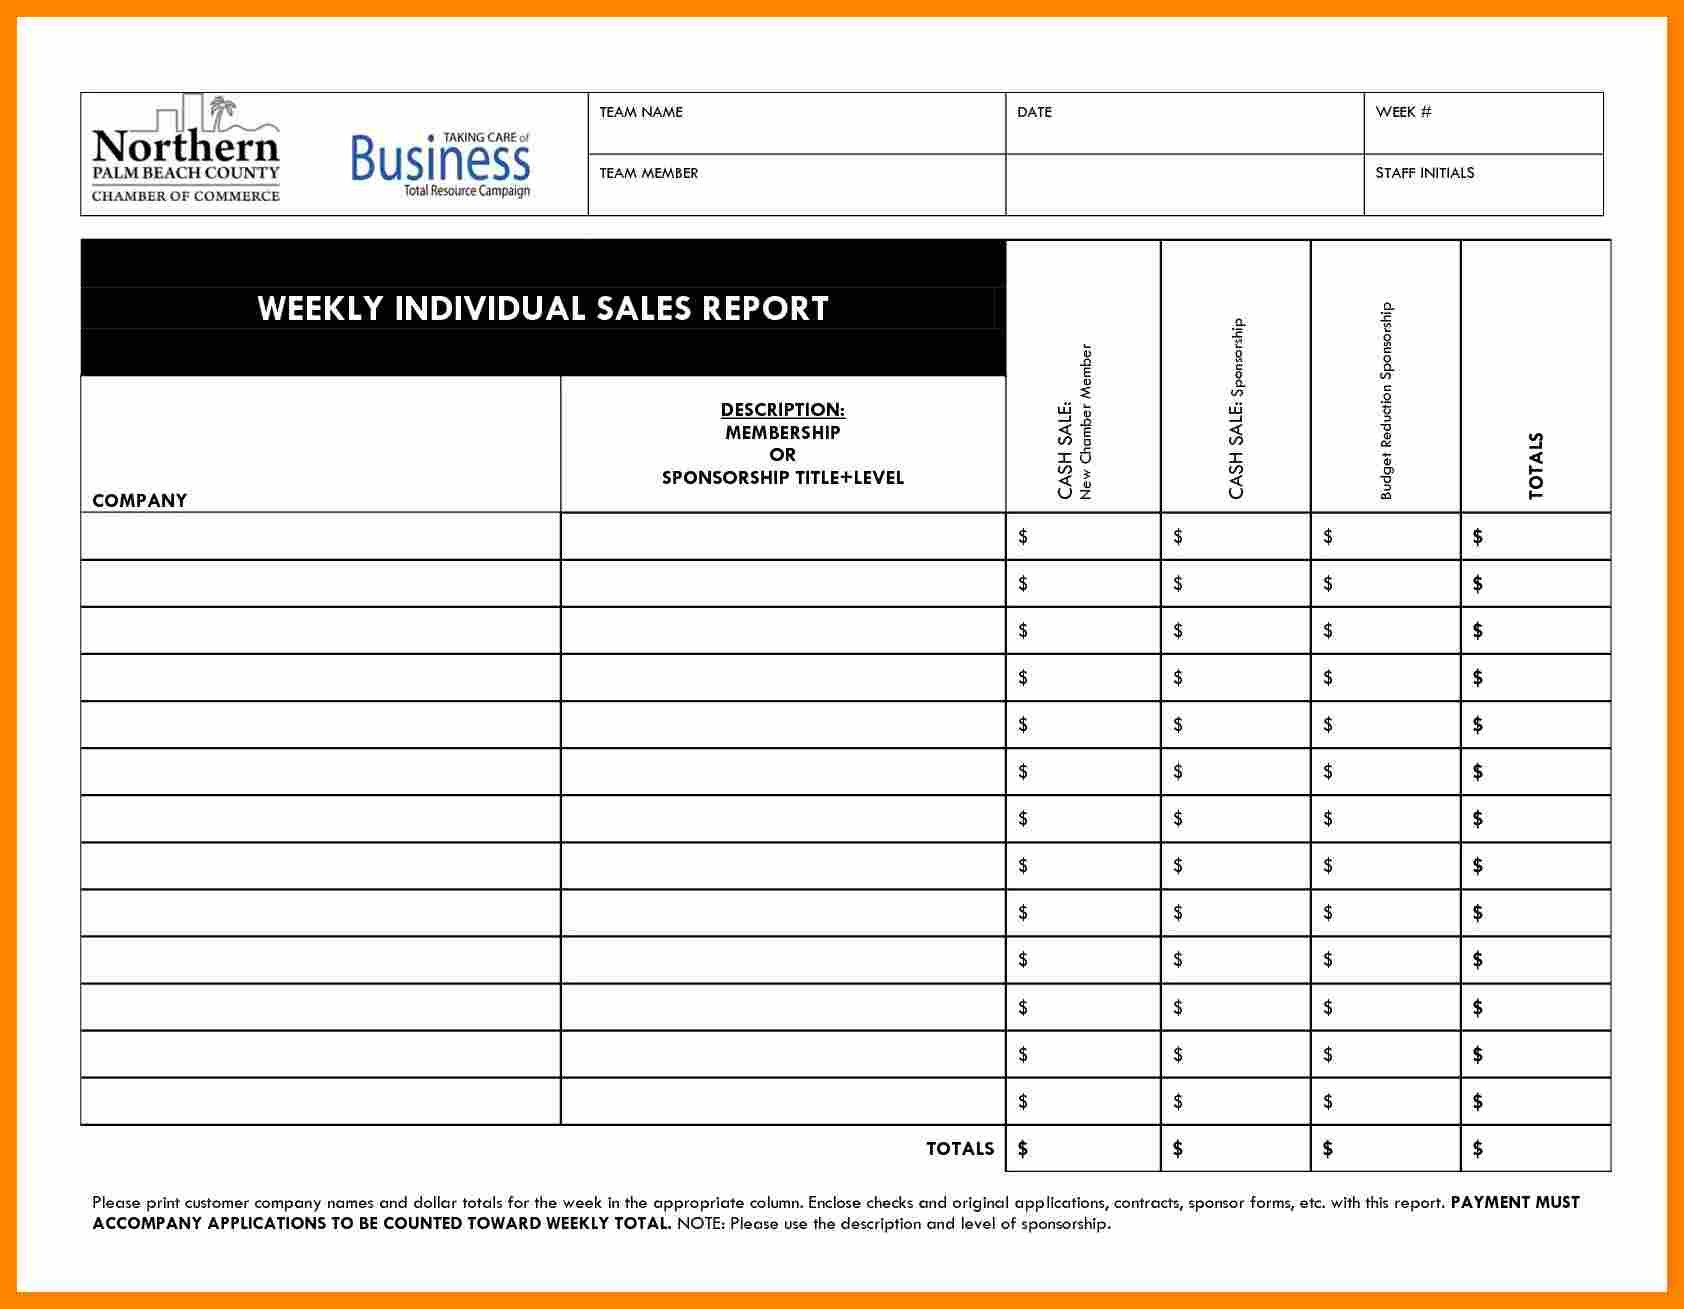 Daily Activity Report Template Free Download  Lobo Development in Sales Call Reports Templates Free